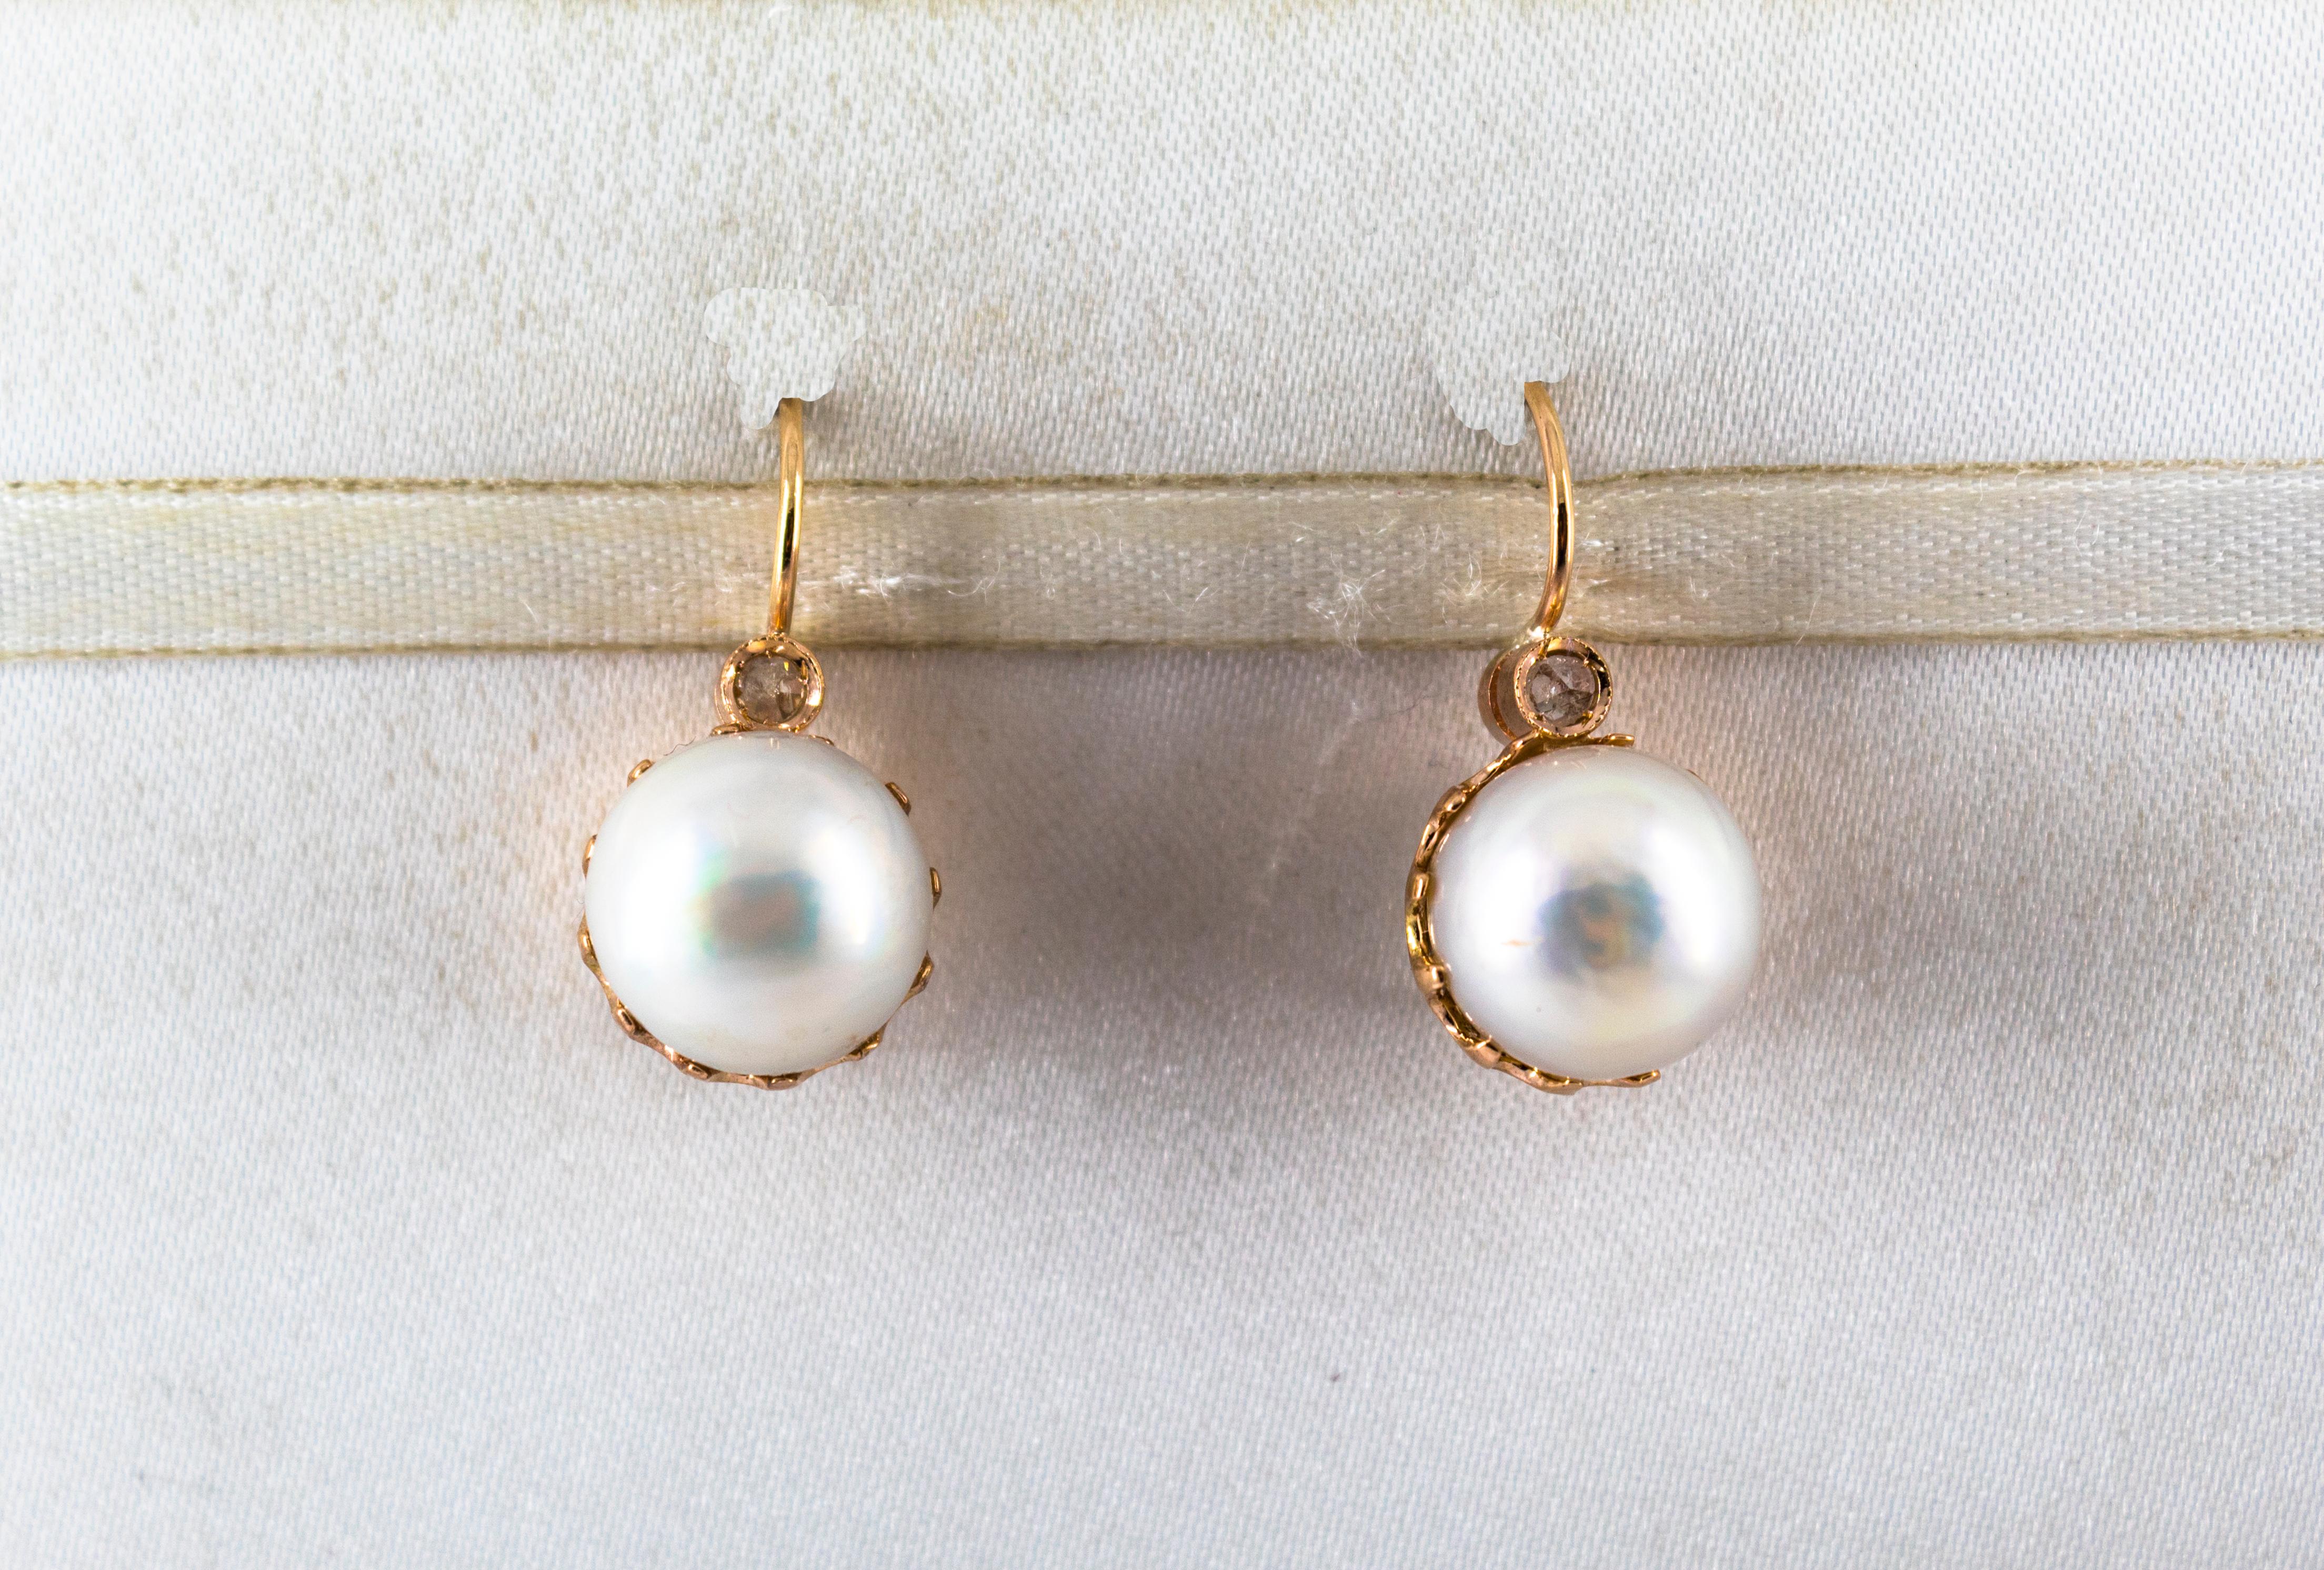 These Earrings are made of 9K Yellow Gold.
These Earrings have 0.10 Carats of White Rose Cut Diamonds.
These Earrings have also Mabe Pearls.

All our Earrings have pins for pierced ears but we can change the closure and make any of our Earrings